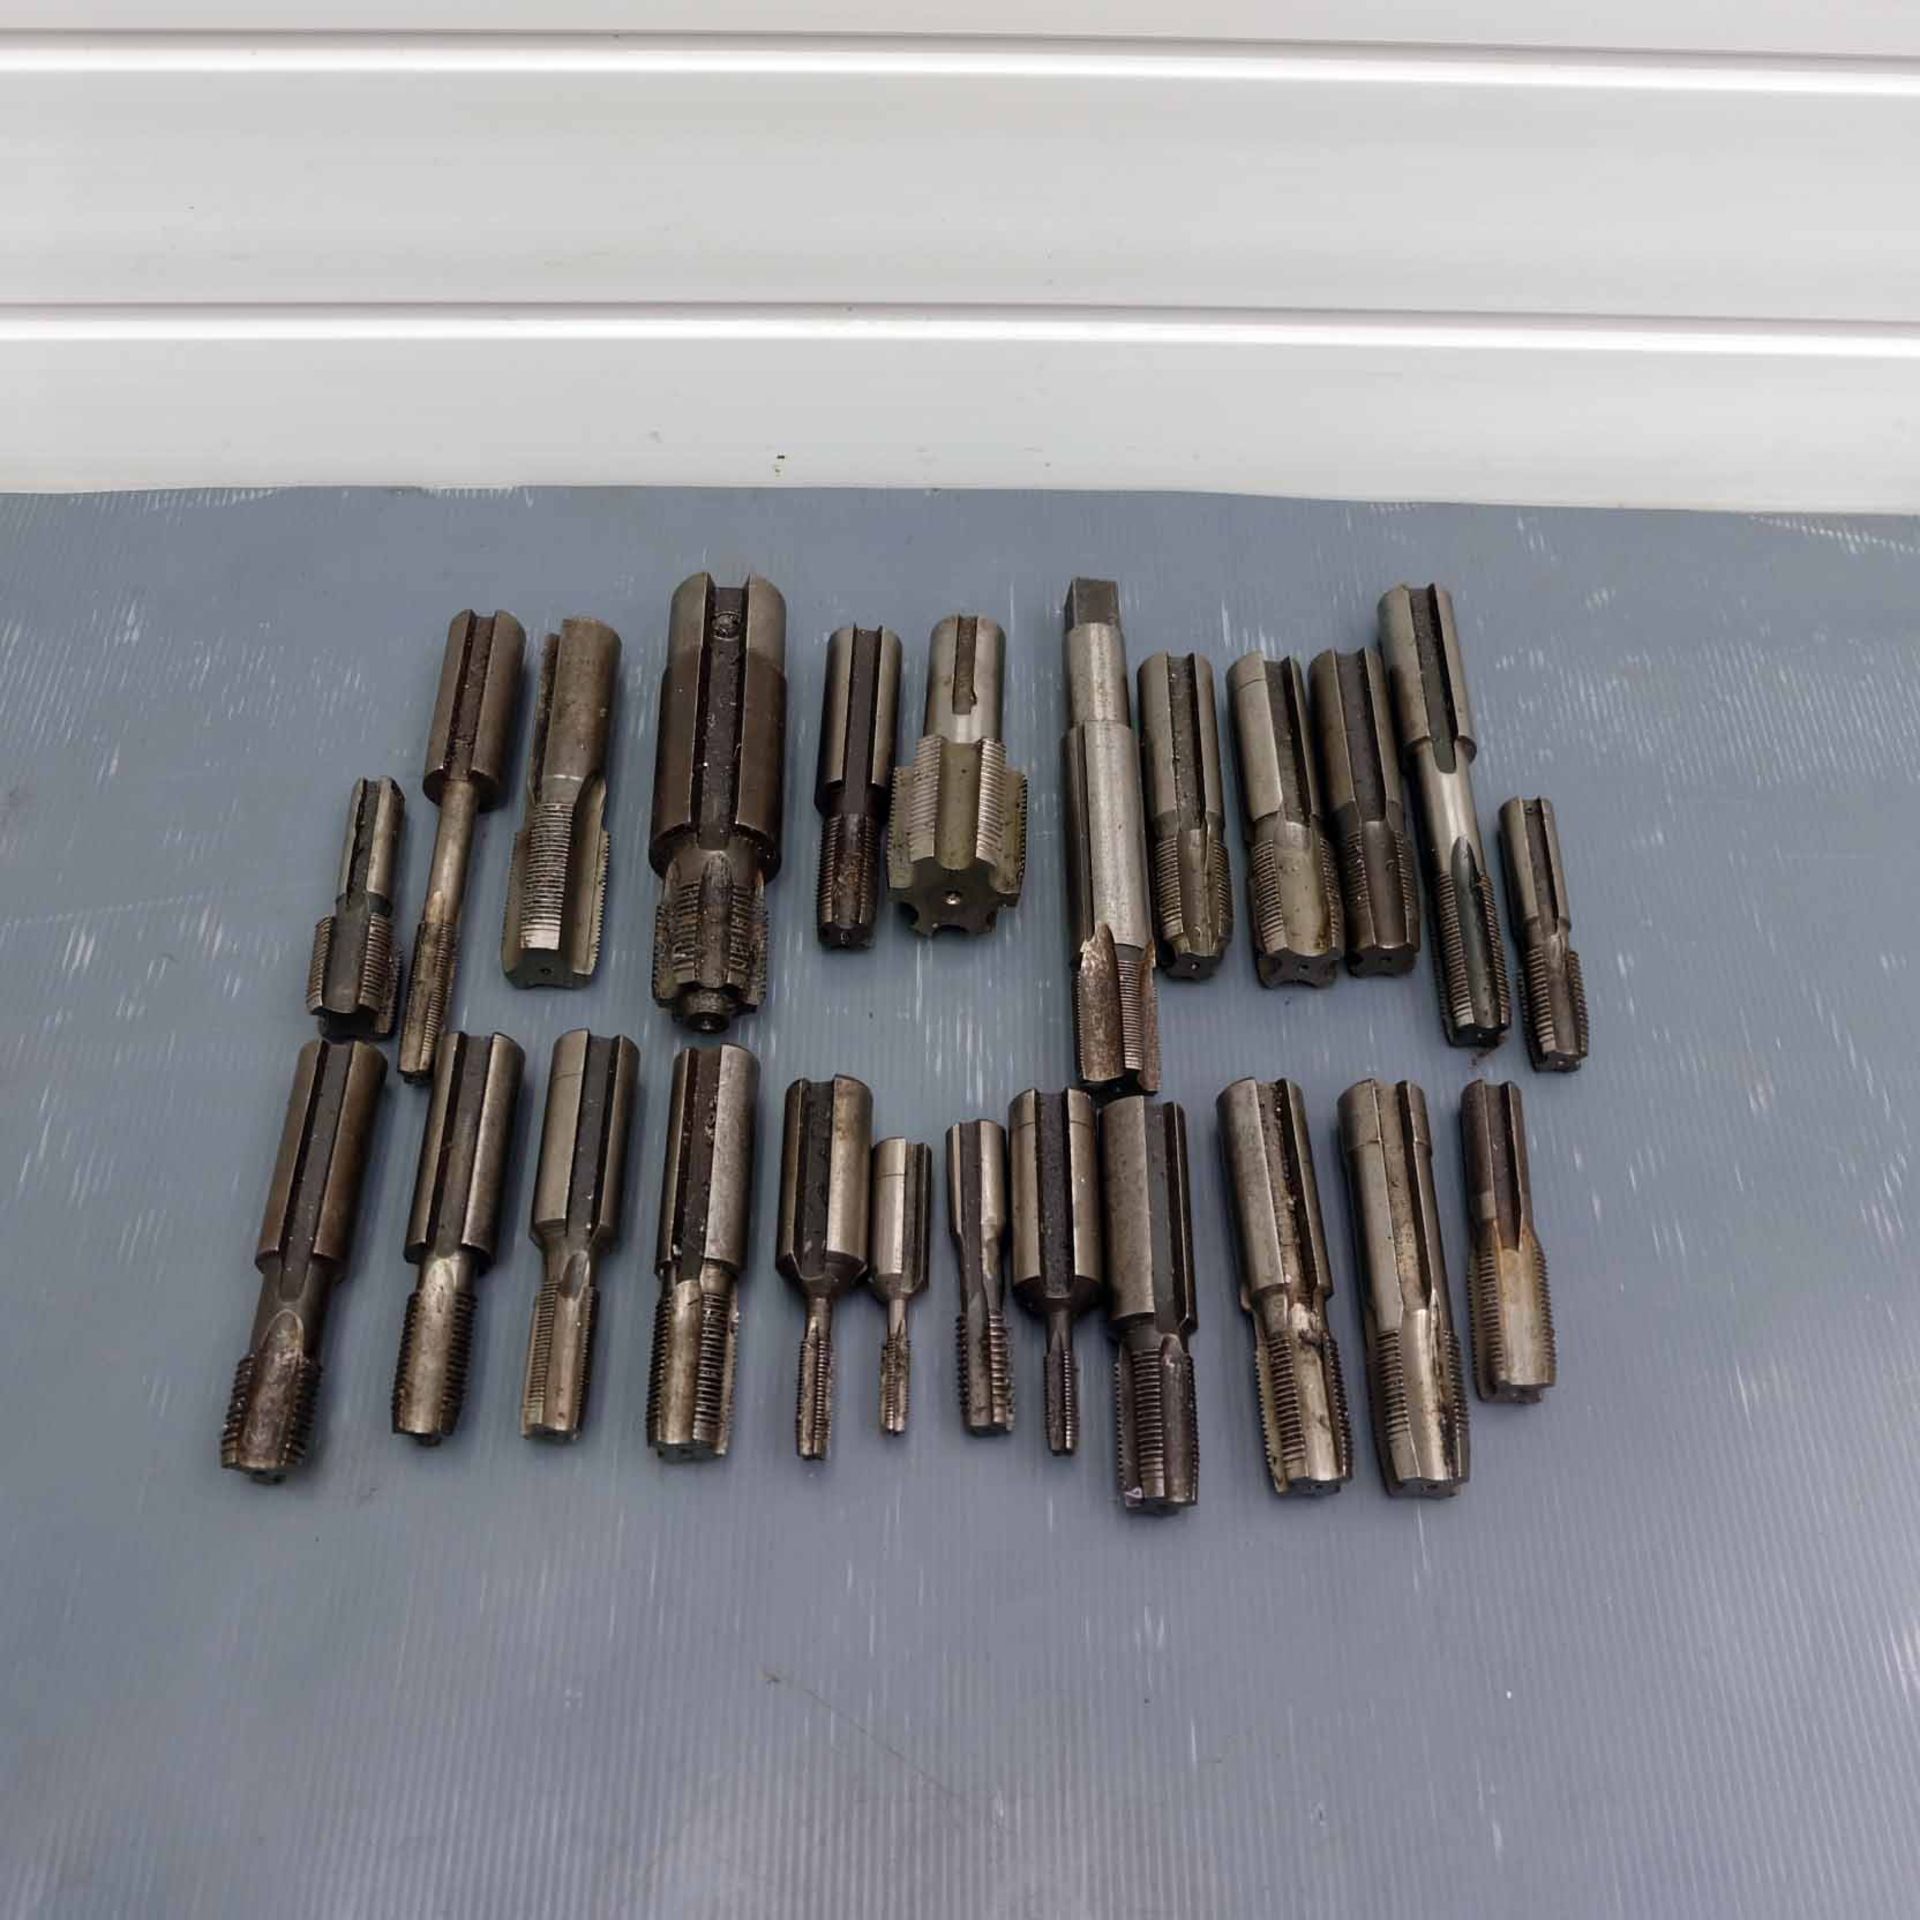 Quantity of Slotted Shank Fitting Taps. Various Sizes.